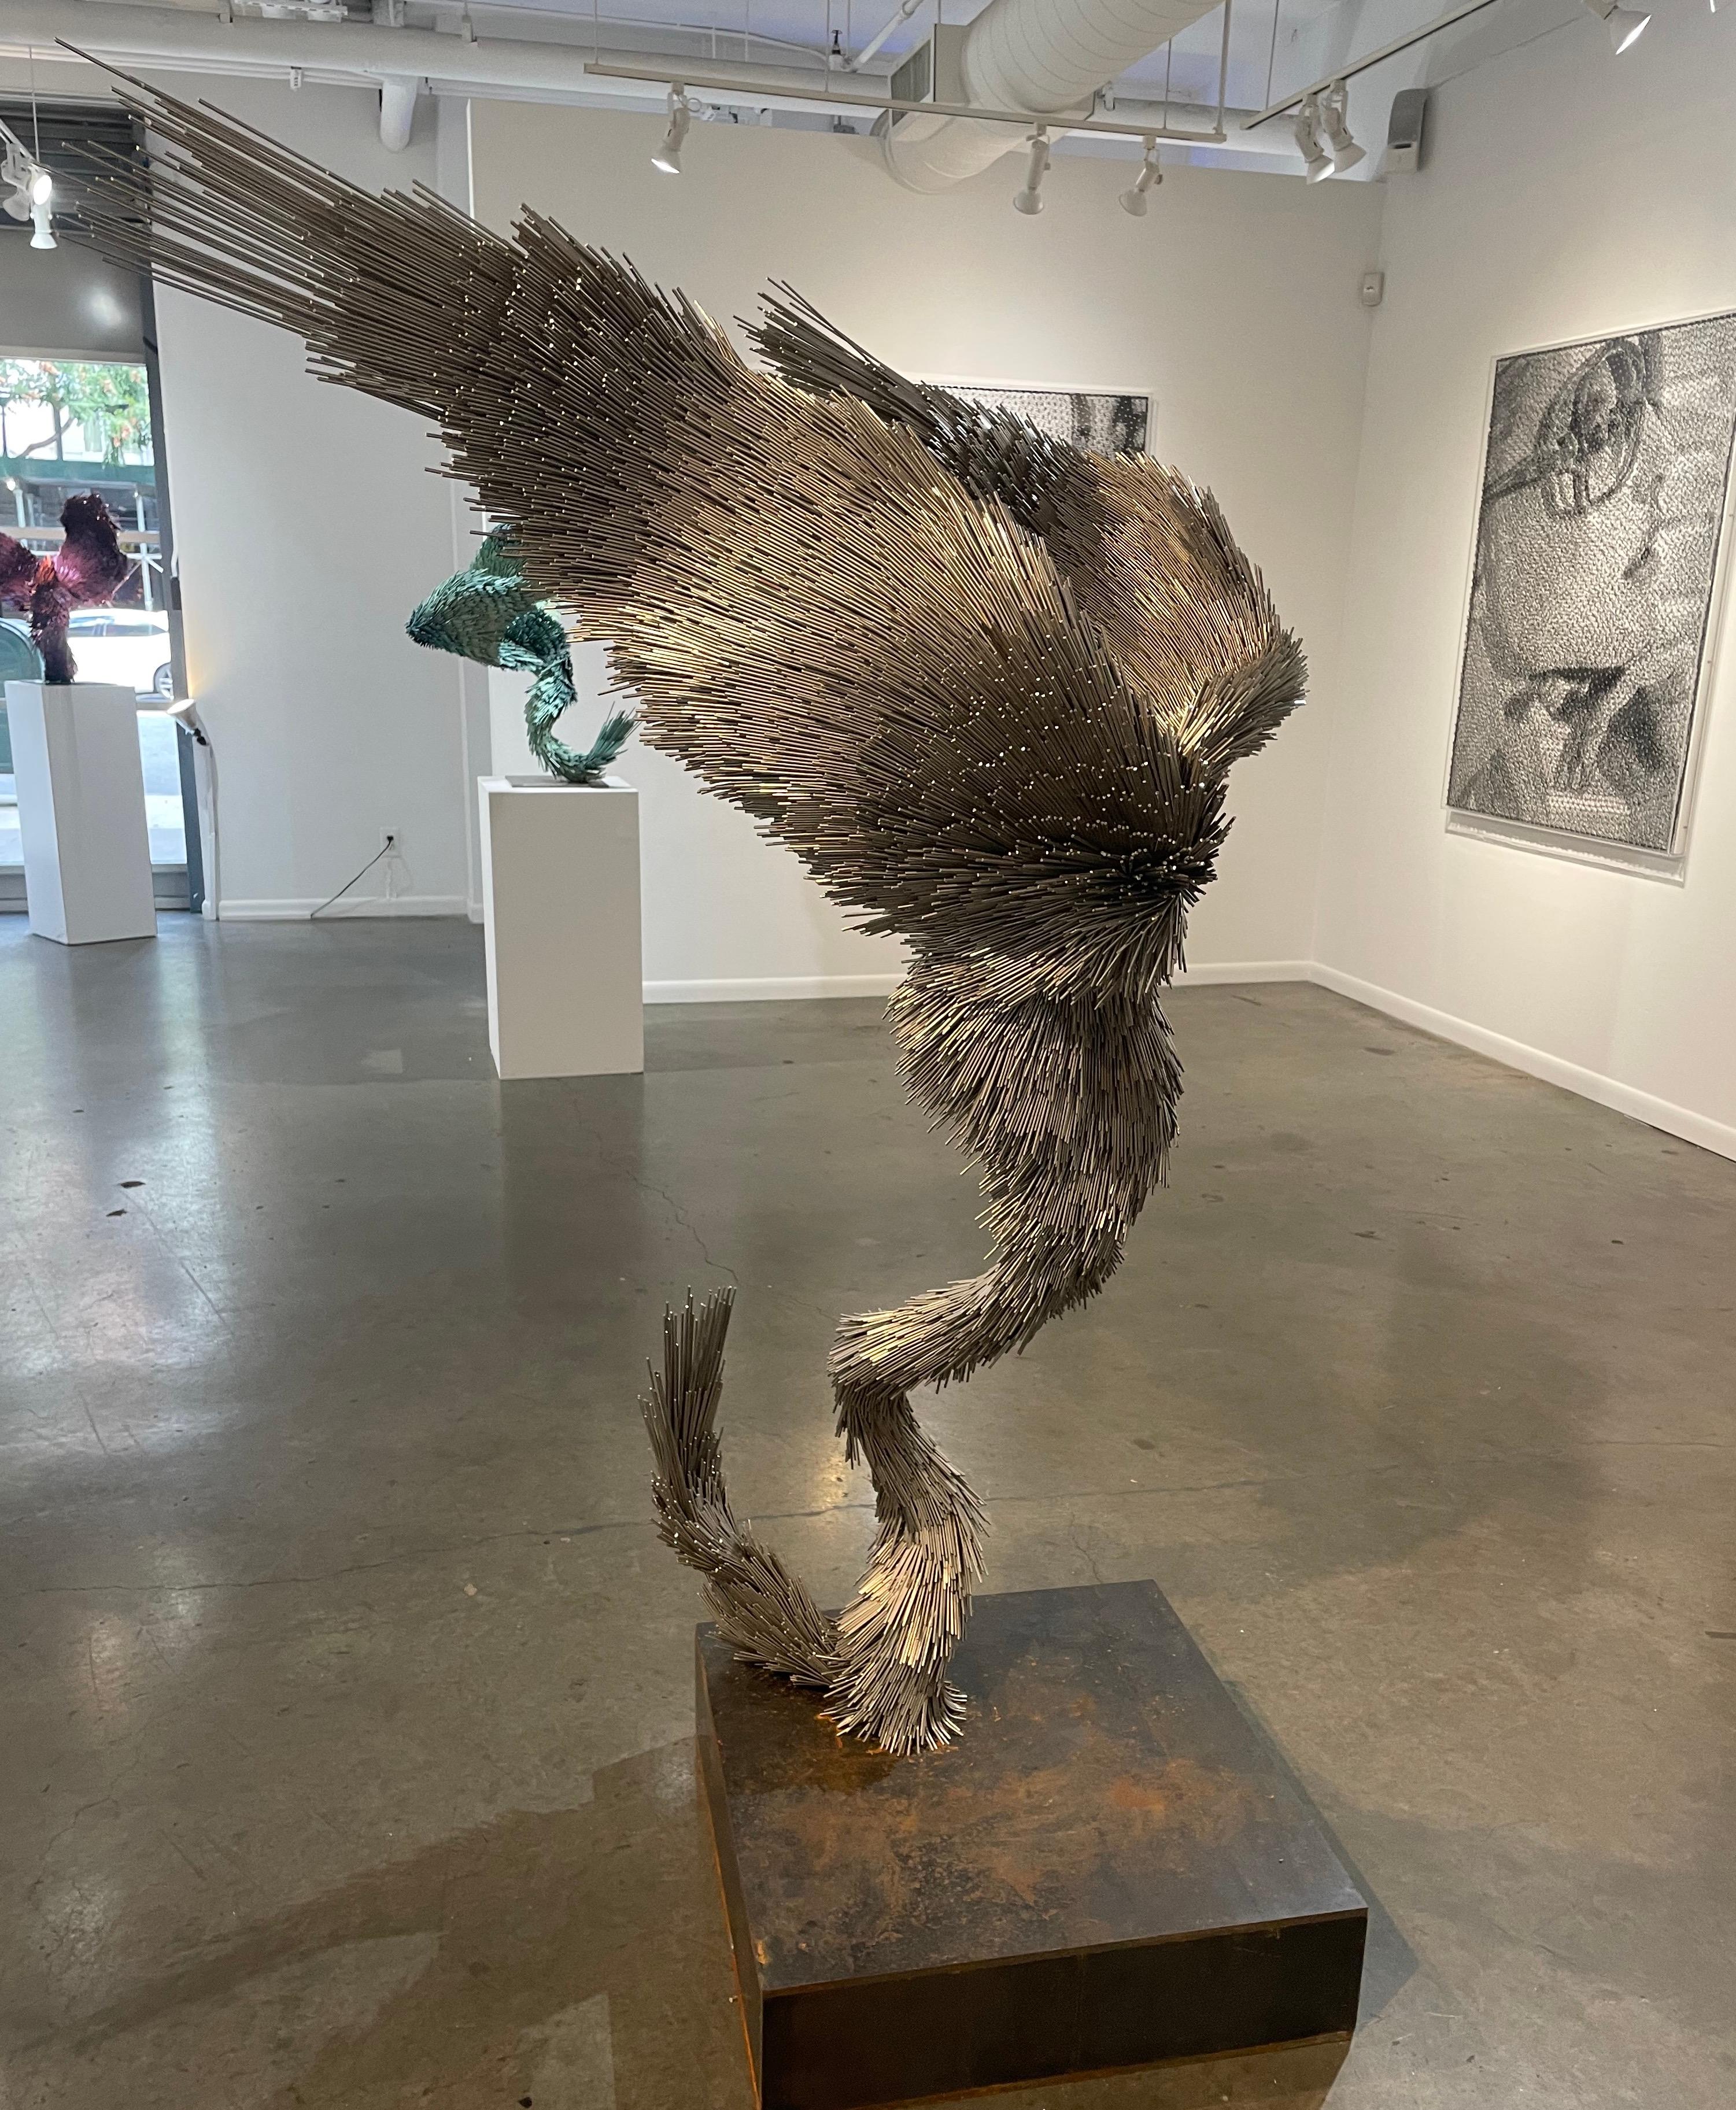 Jake Michael Singer (b. 1991) experiments with a broad range of disciplines from photography to works on paper, and commands an exquisite mastery of sculpture. Drawing inspiration from the emergent behavior of flocking birds, where the individual is